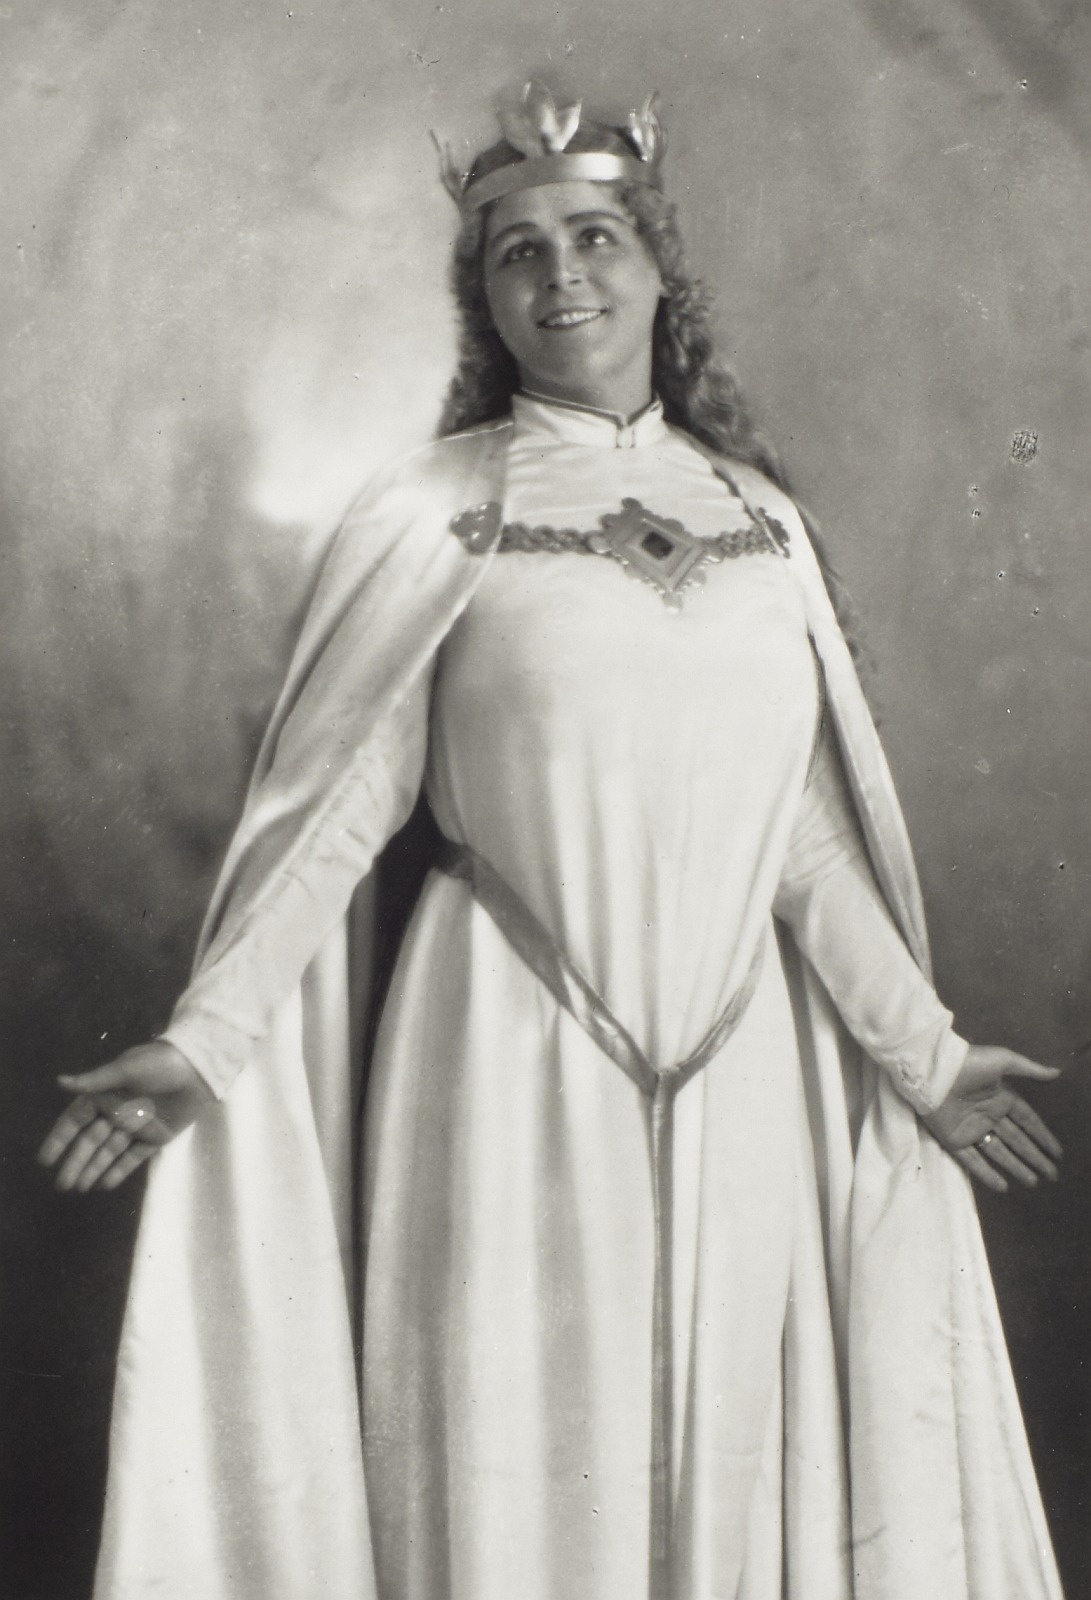 Black and white photograph of singer costume with crown and long dress